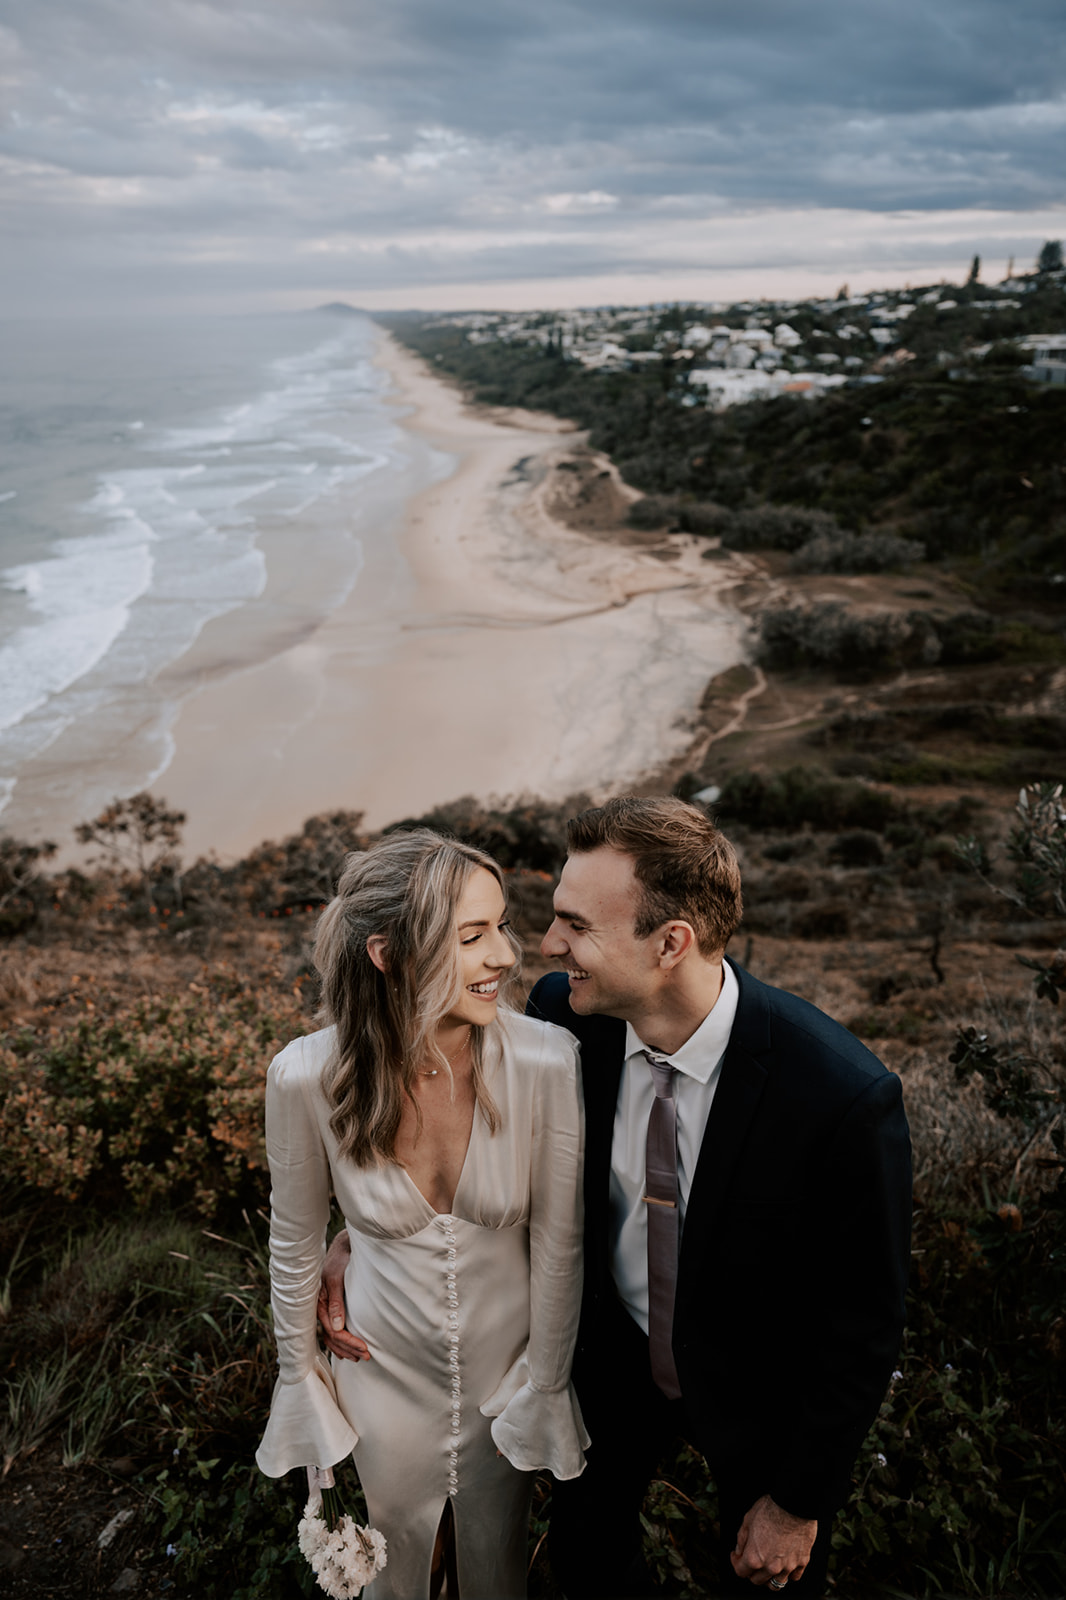 The Top 10 Wedding Photography Trends Of The Year For Sunshine Coast Brides